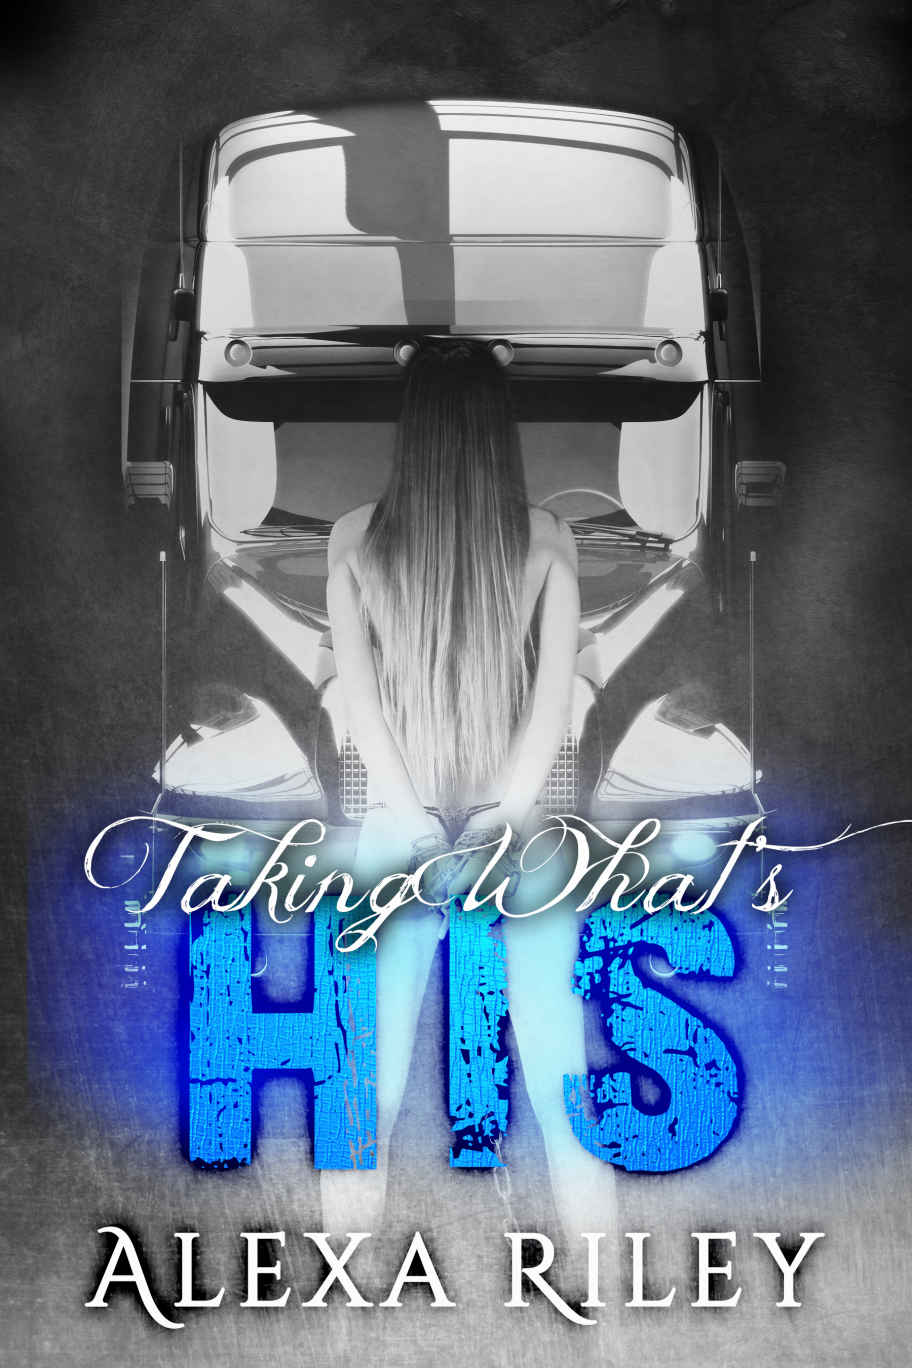 Taking What's His (Forced Submission Book 4) by Alexa Riley